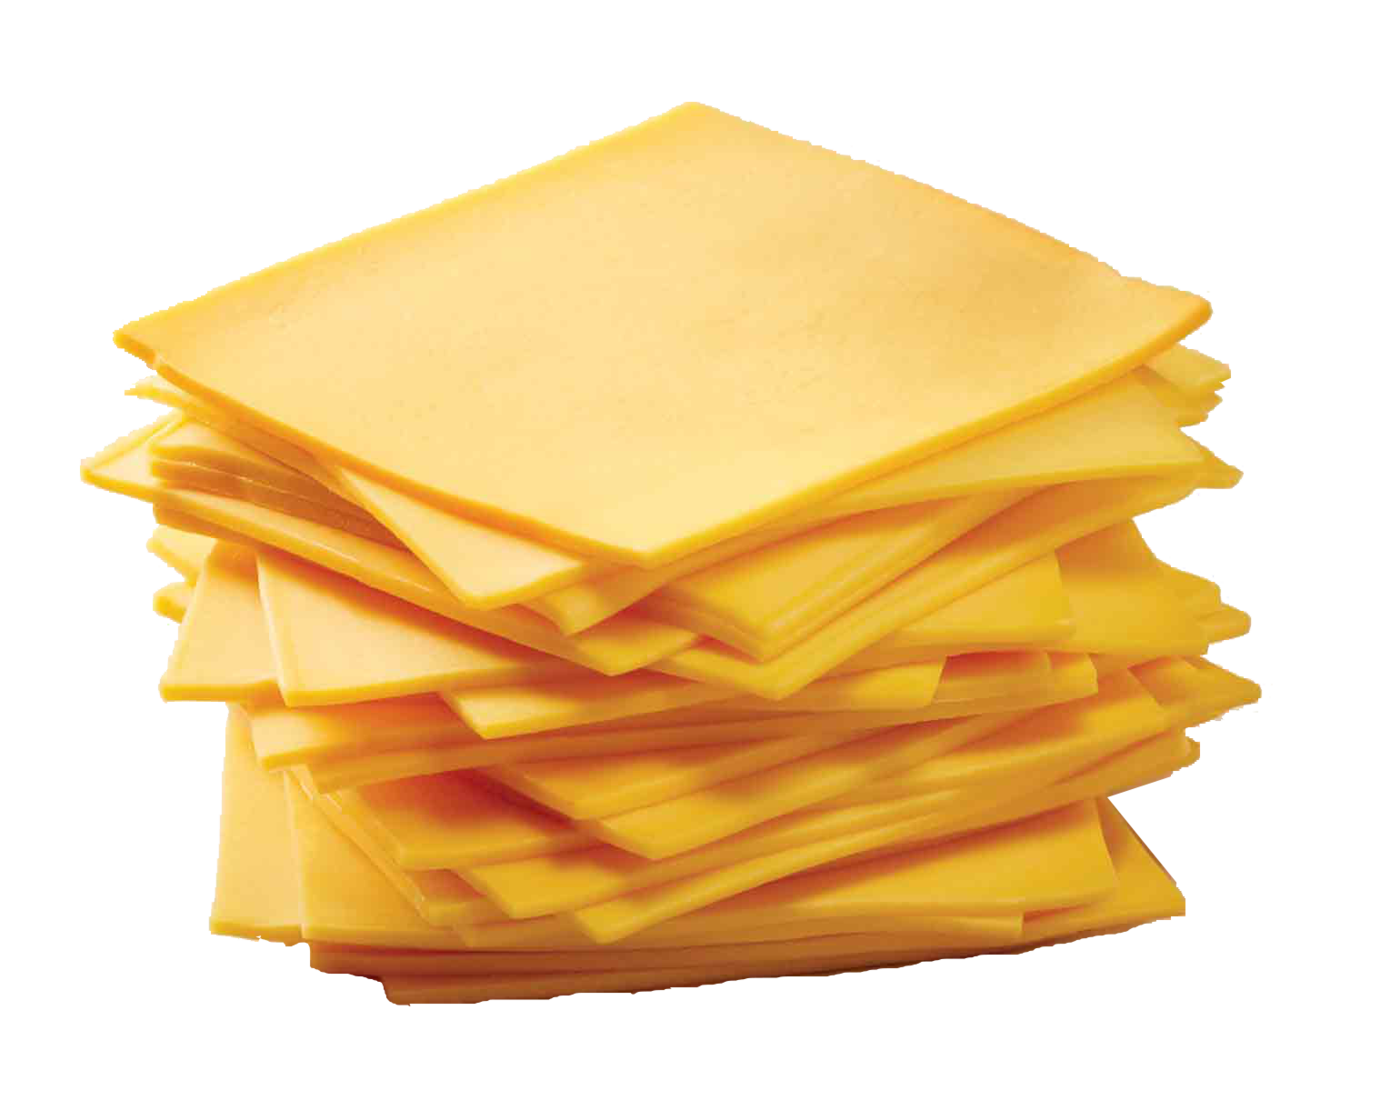 Download PNG image - Cheese Piece Slice PNG Image 